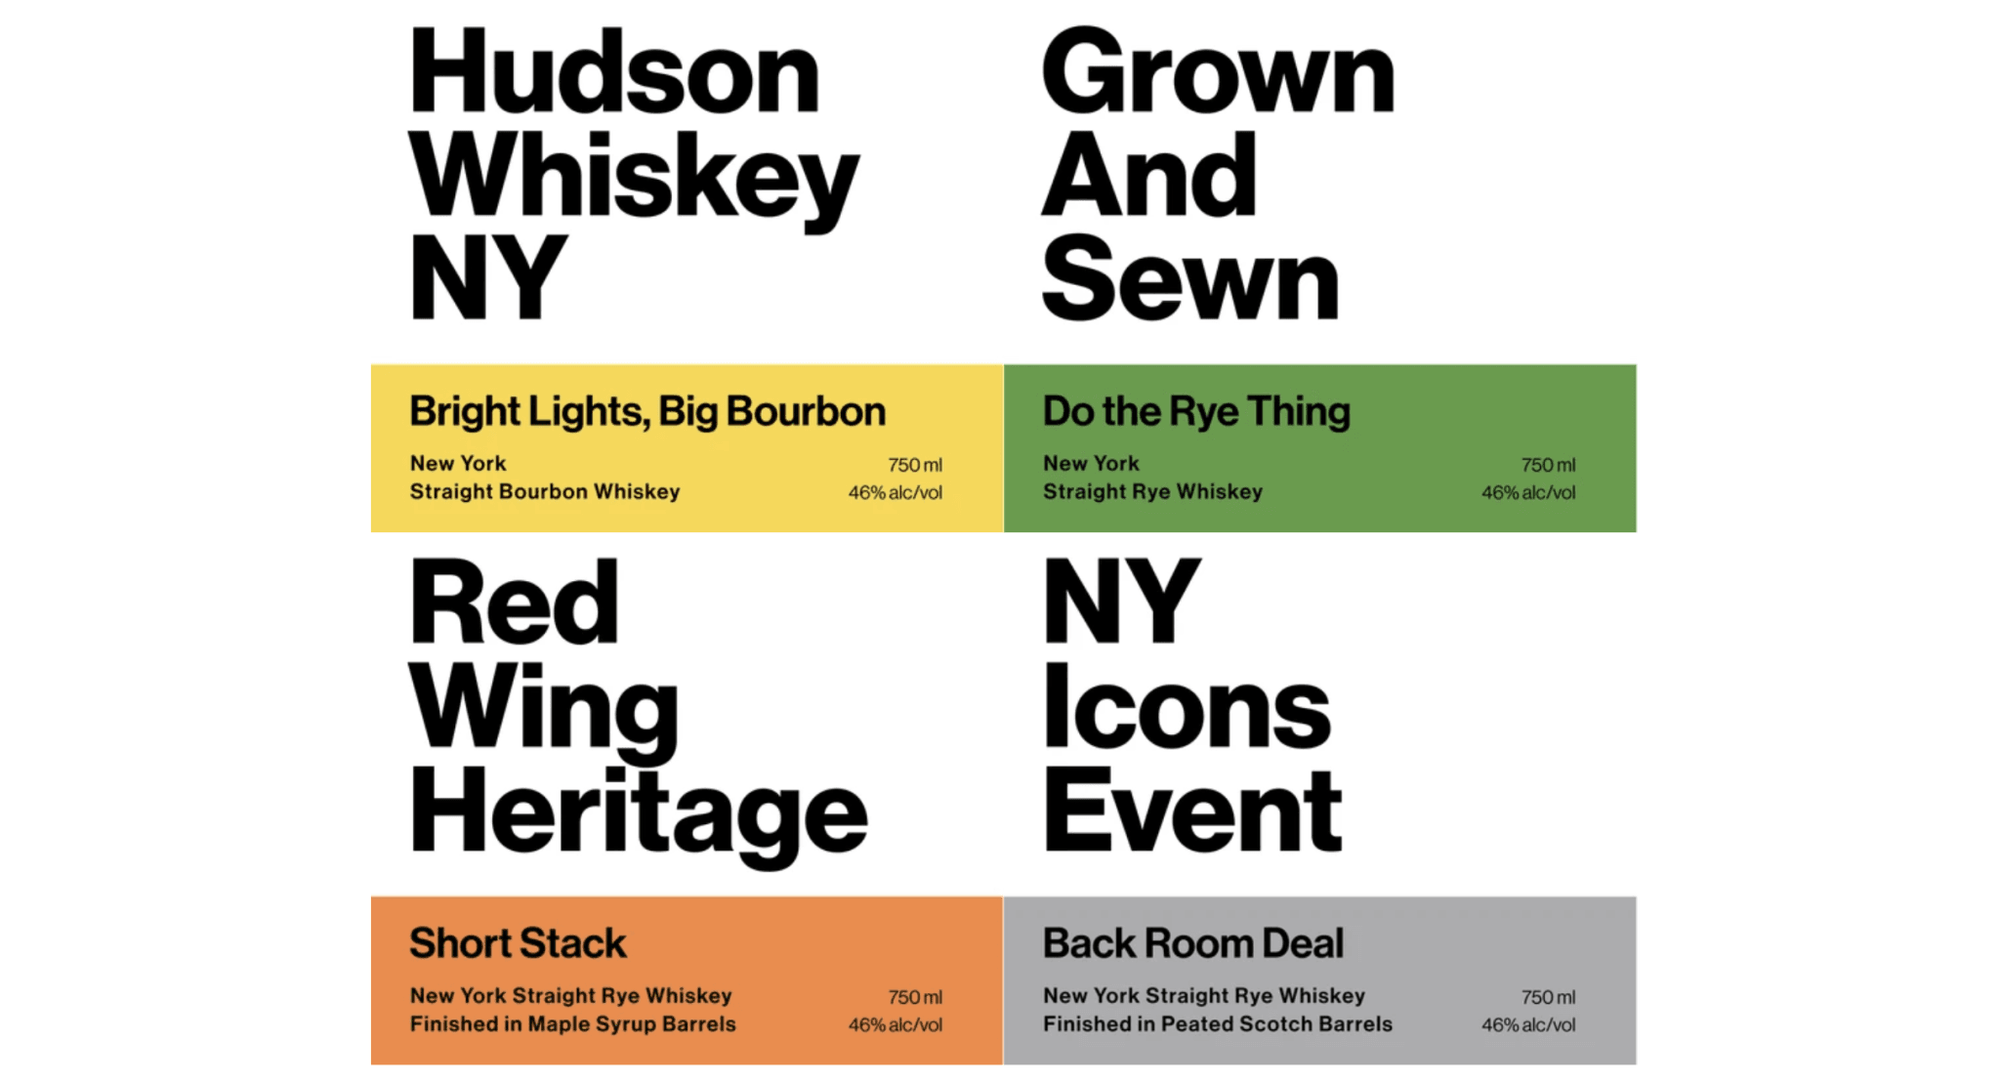 Red Wing Heritage X grown and sewn. X Hudson Whiskey NY Icons Event - grown&sewn